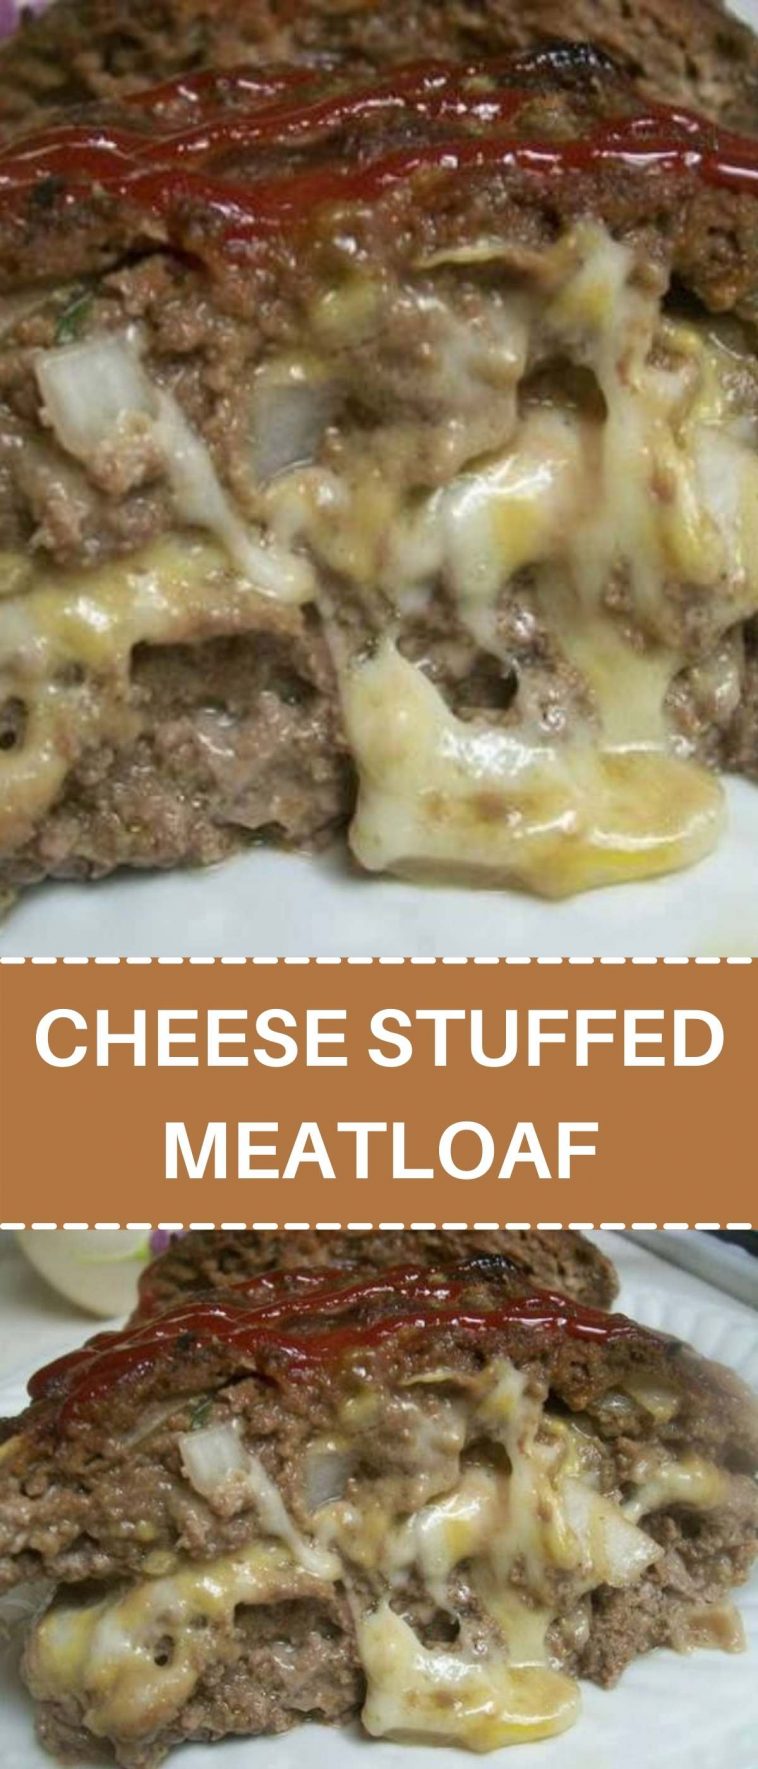 CHEESE STUFFED MEATLOAF